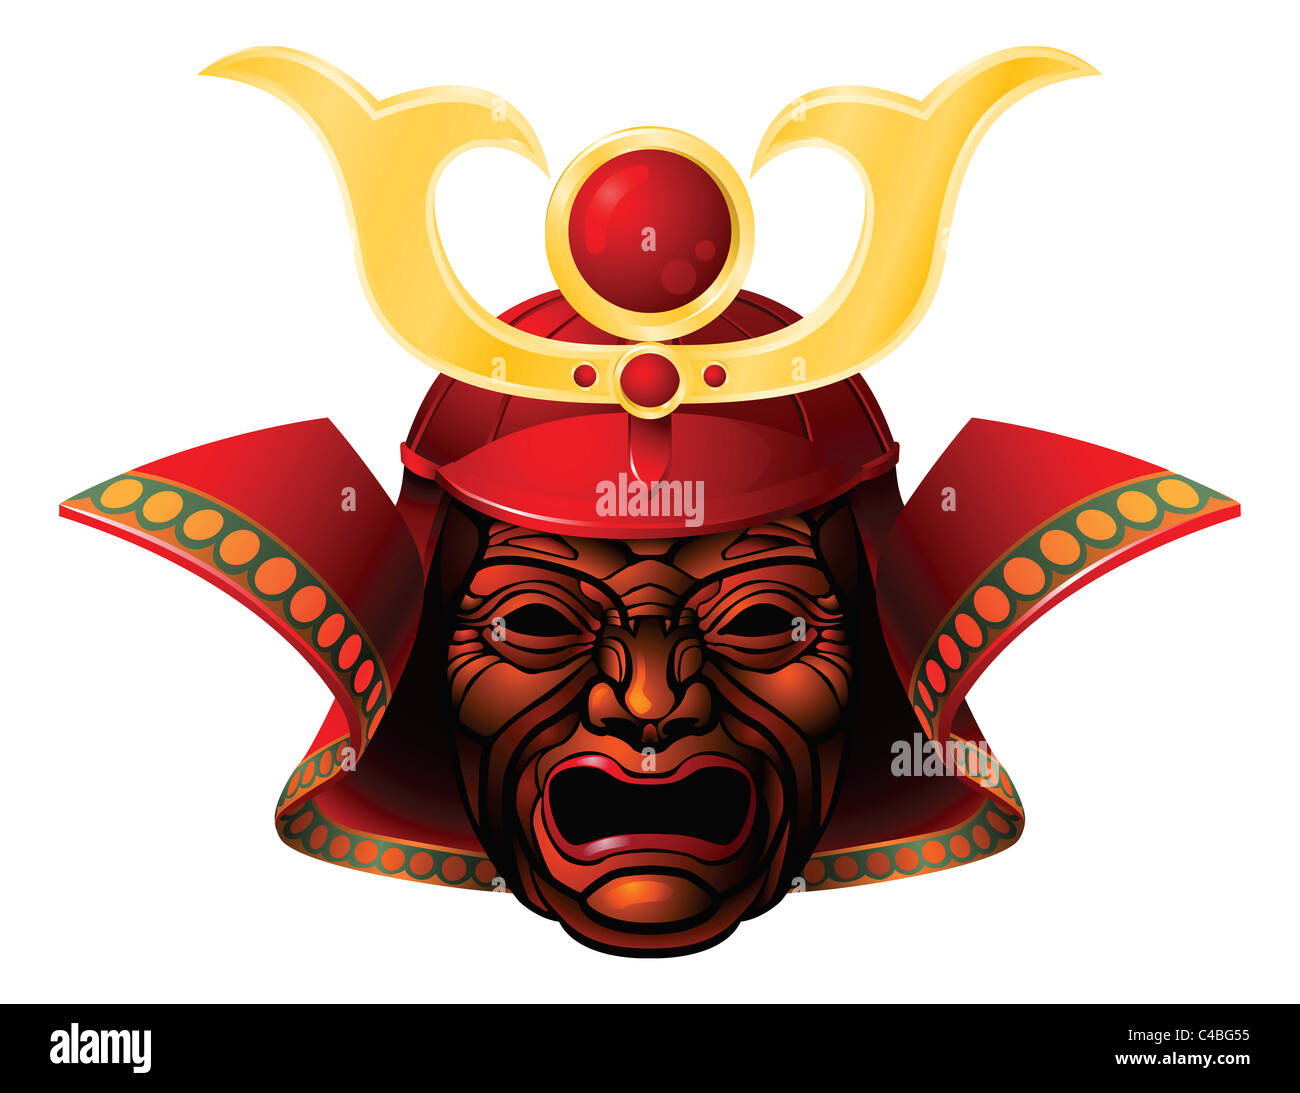 An illustration of a fearsome red and yellow samurai mask Stock Photo